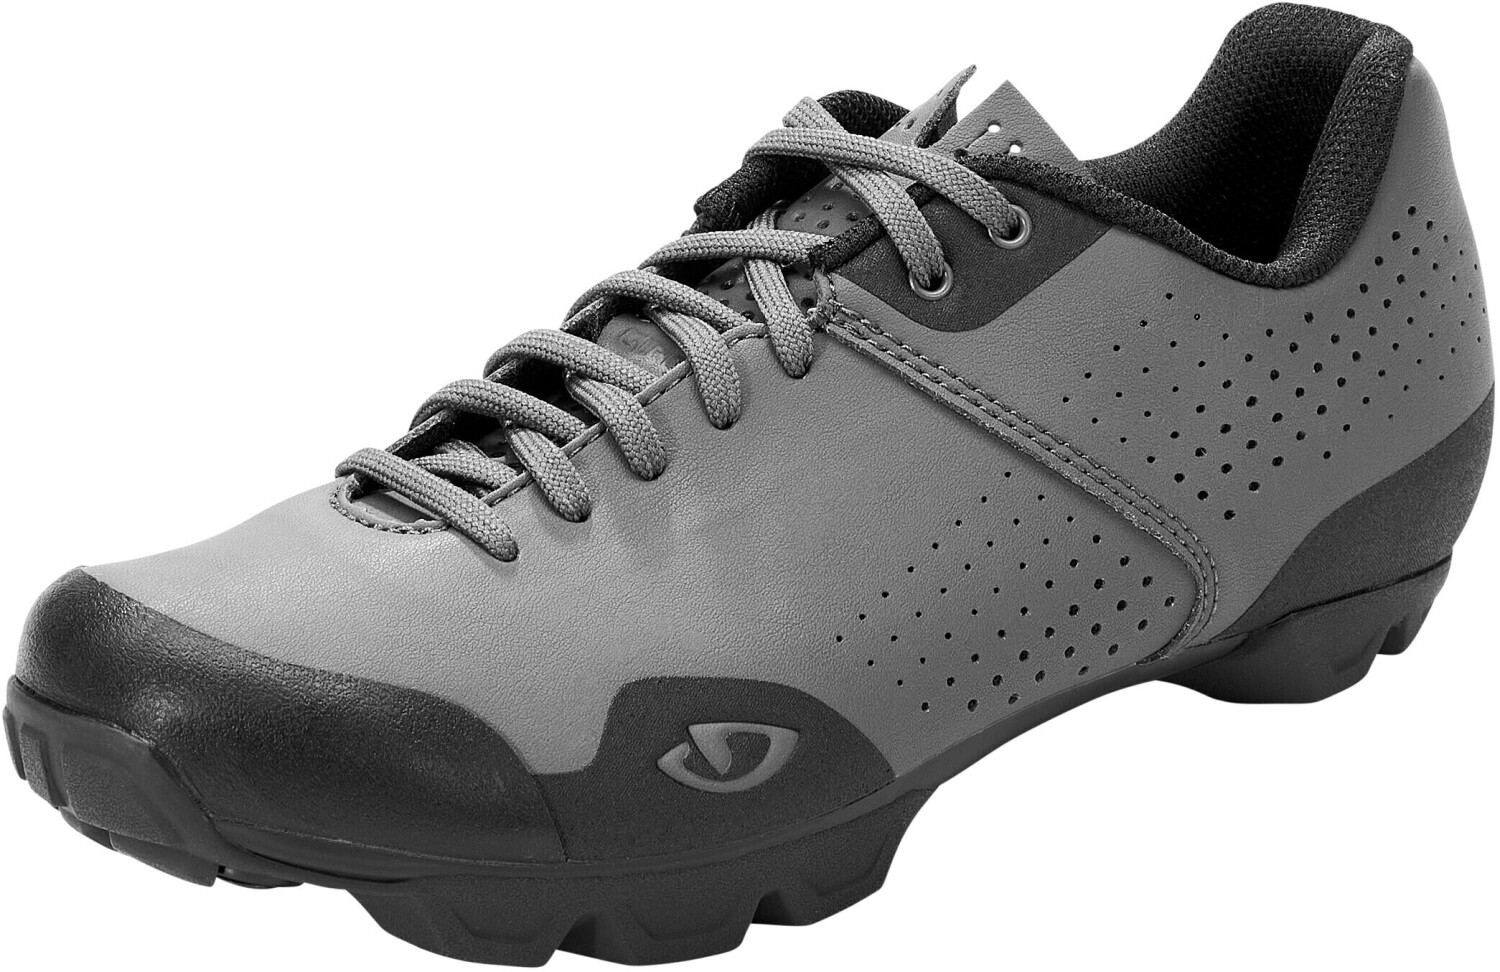 Photos - Cycling Shoes Giro Privateer Lace Shoes Men's gray/black 